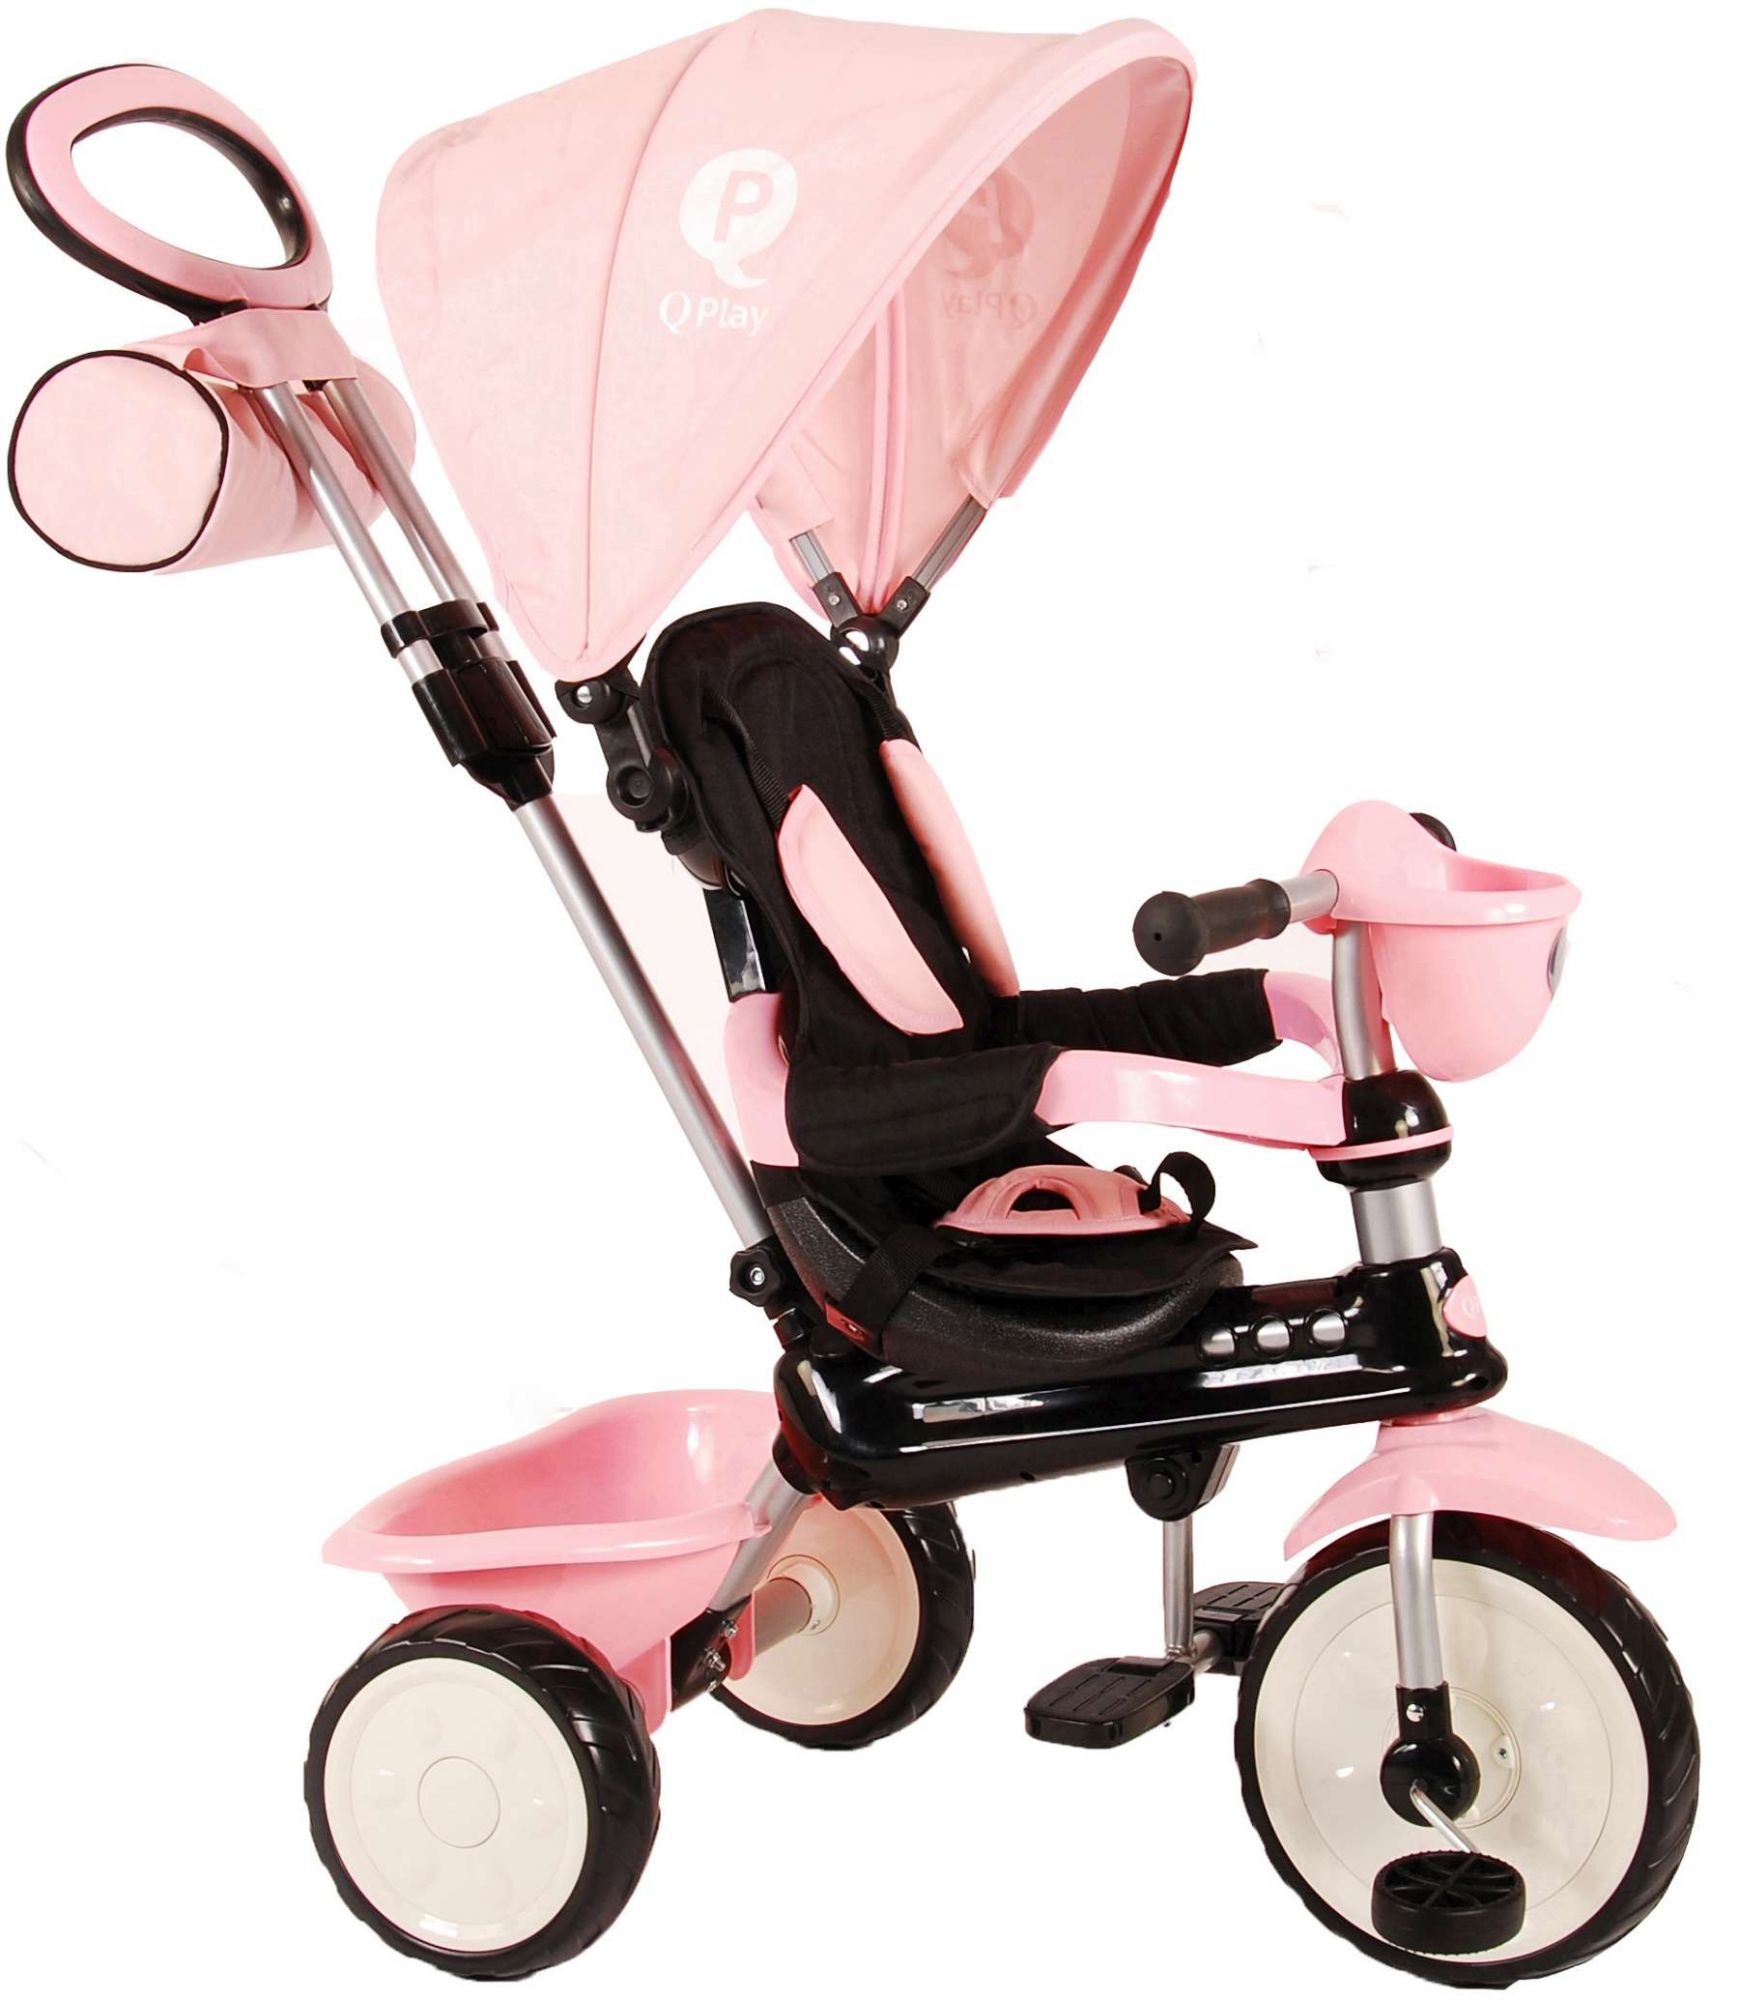 girls tricycle